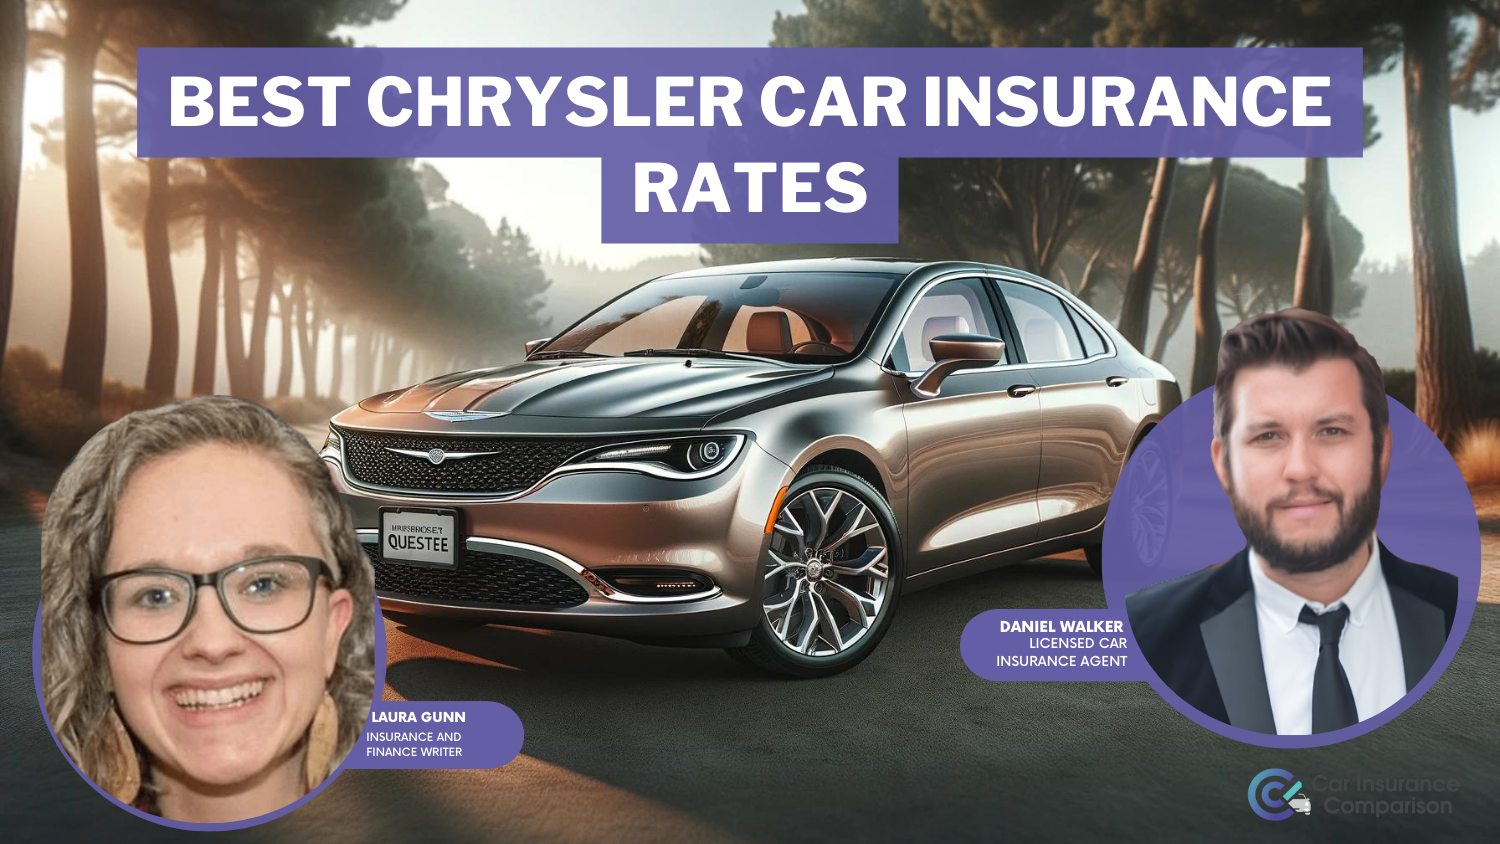 Best Chrysler Car Insurance Rates: State Farm, Geico, and Progressive